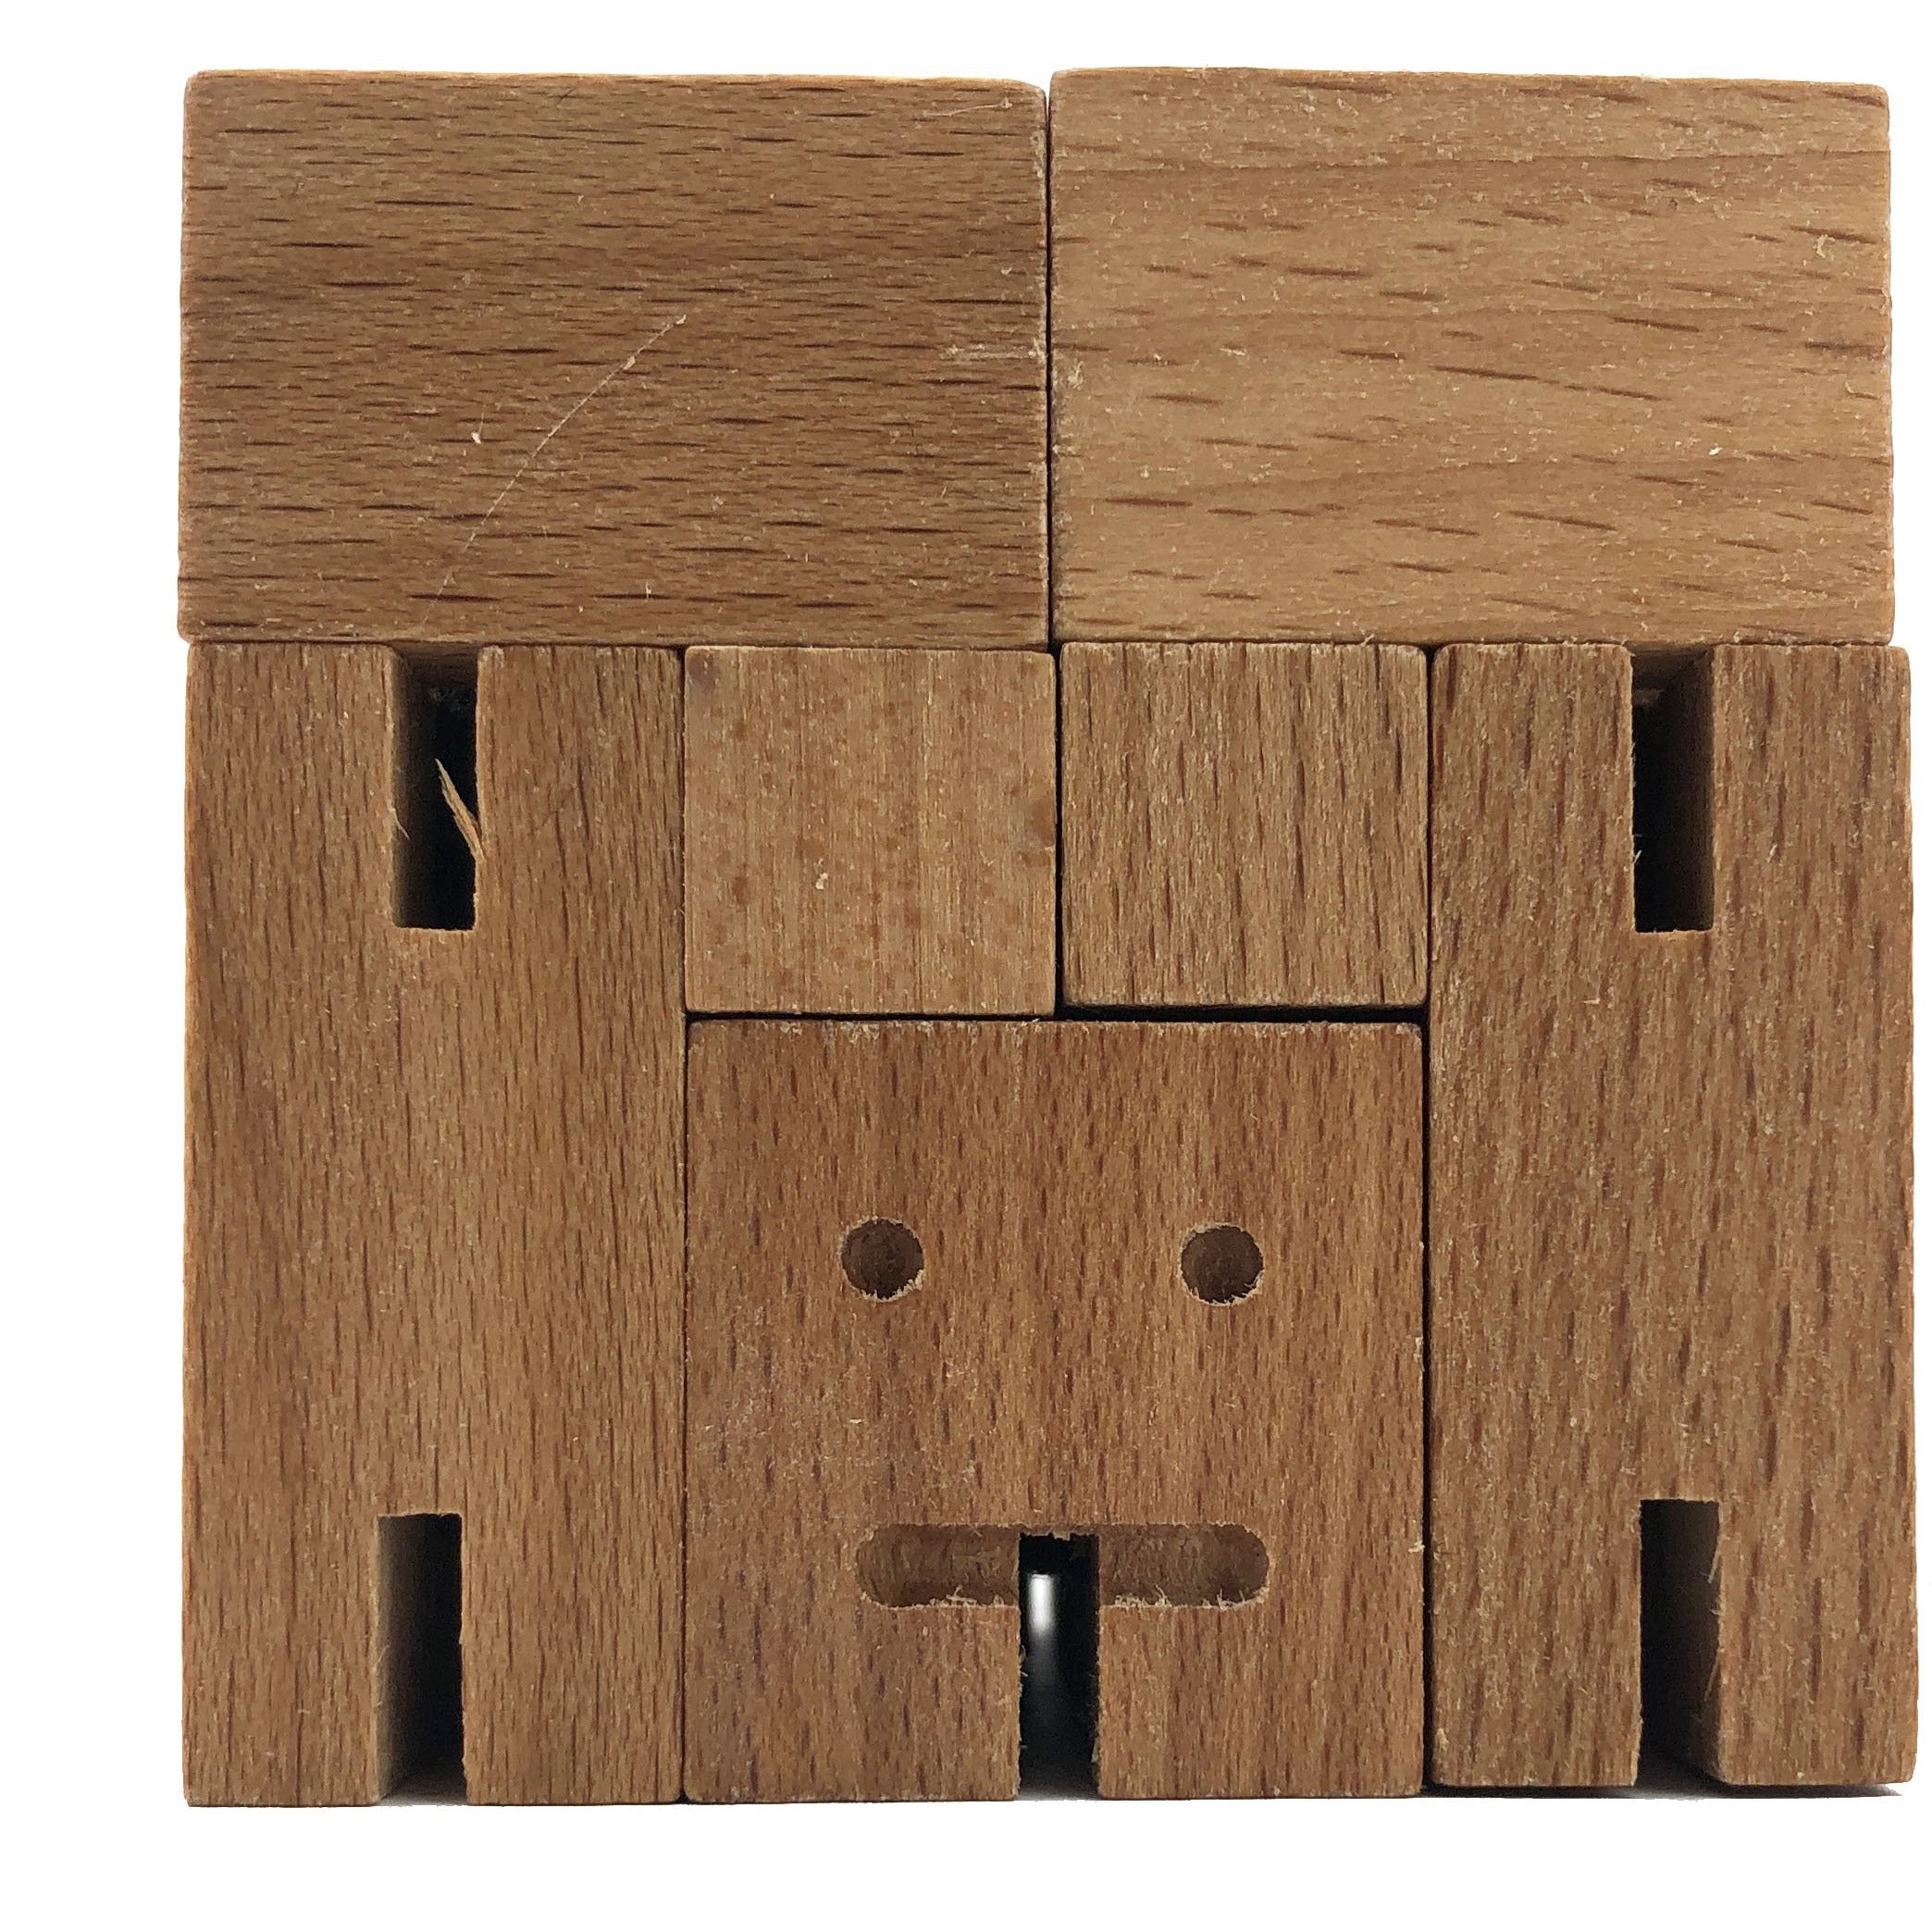 Areaware Mini Cubebot / Wooden Toy Puzzle / Natural Wood / Desk Toy